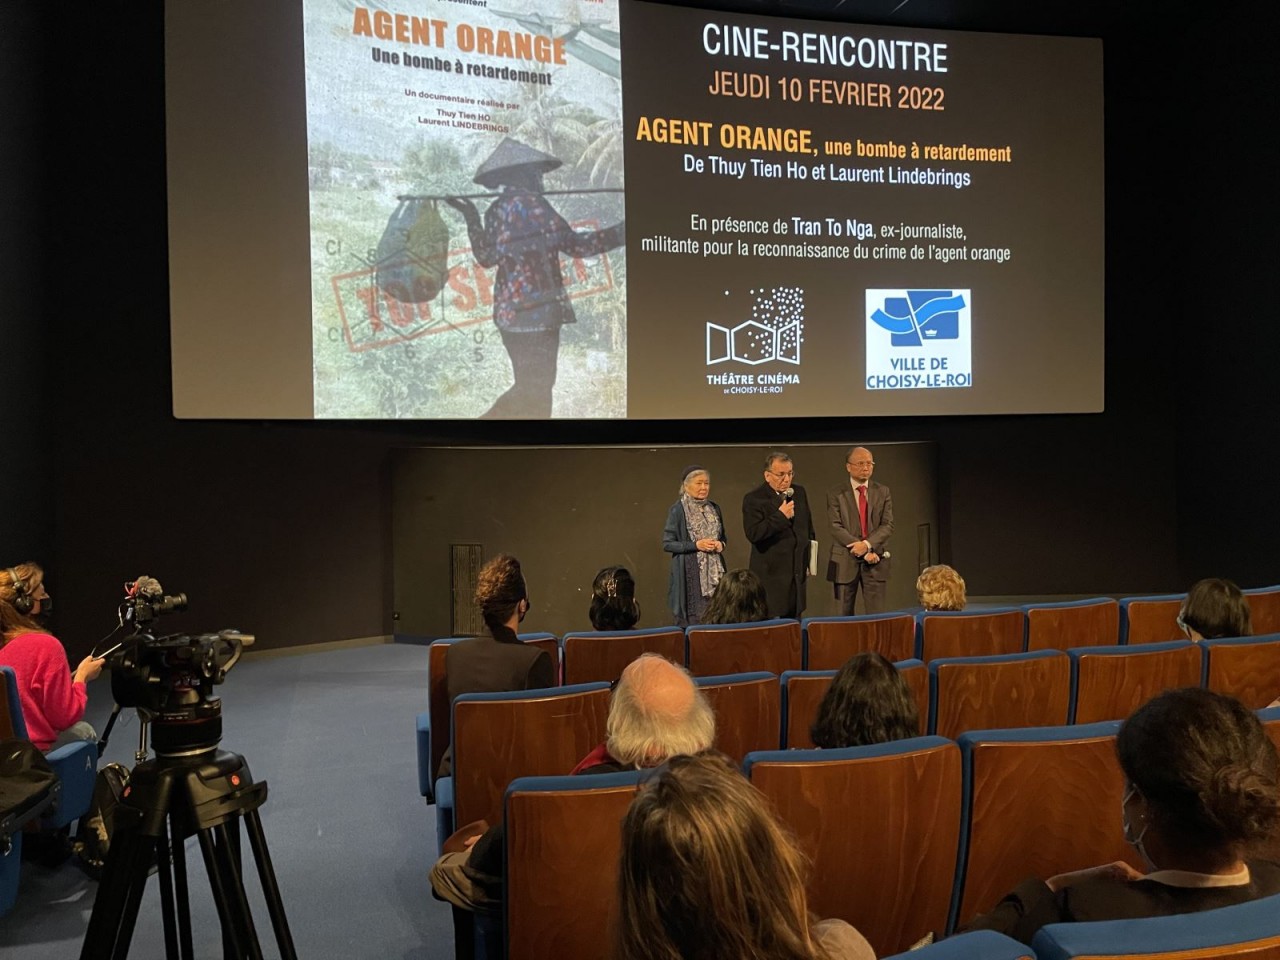 Choisy-le-Roi Screens Film in Support Vietnam’s AO/Dioxin Victims